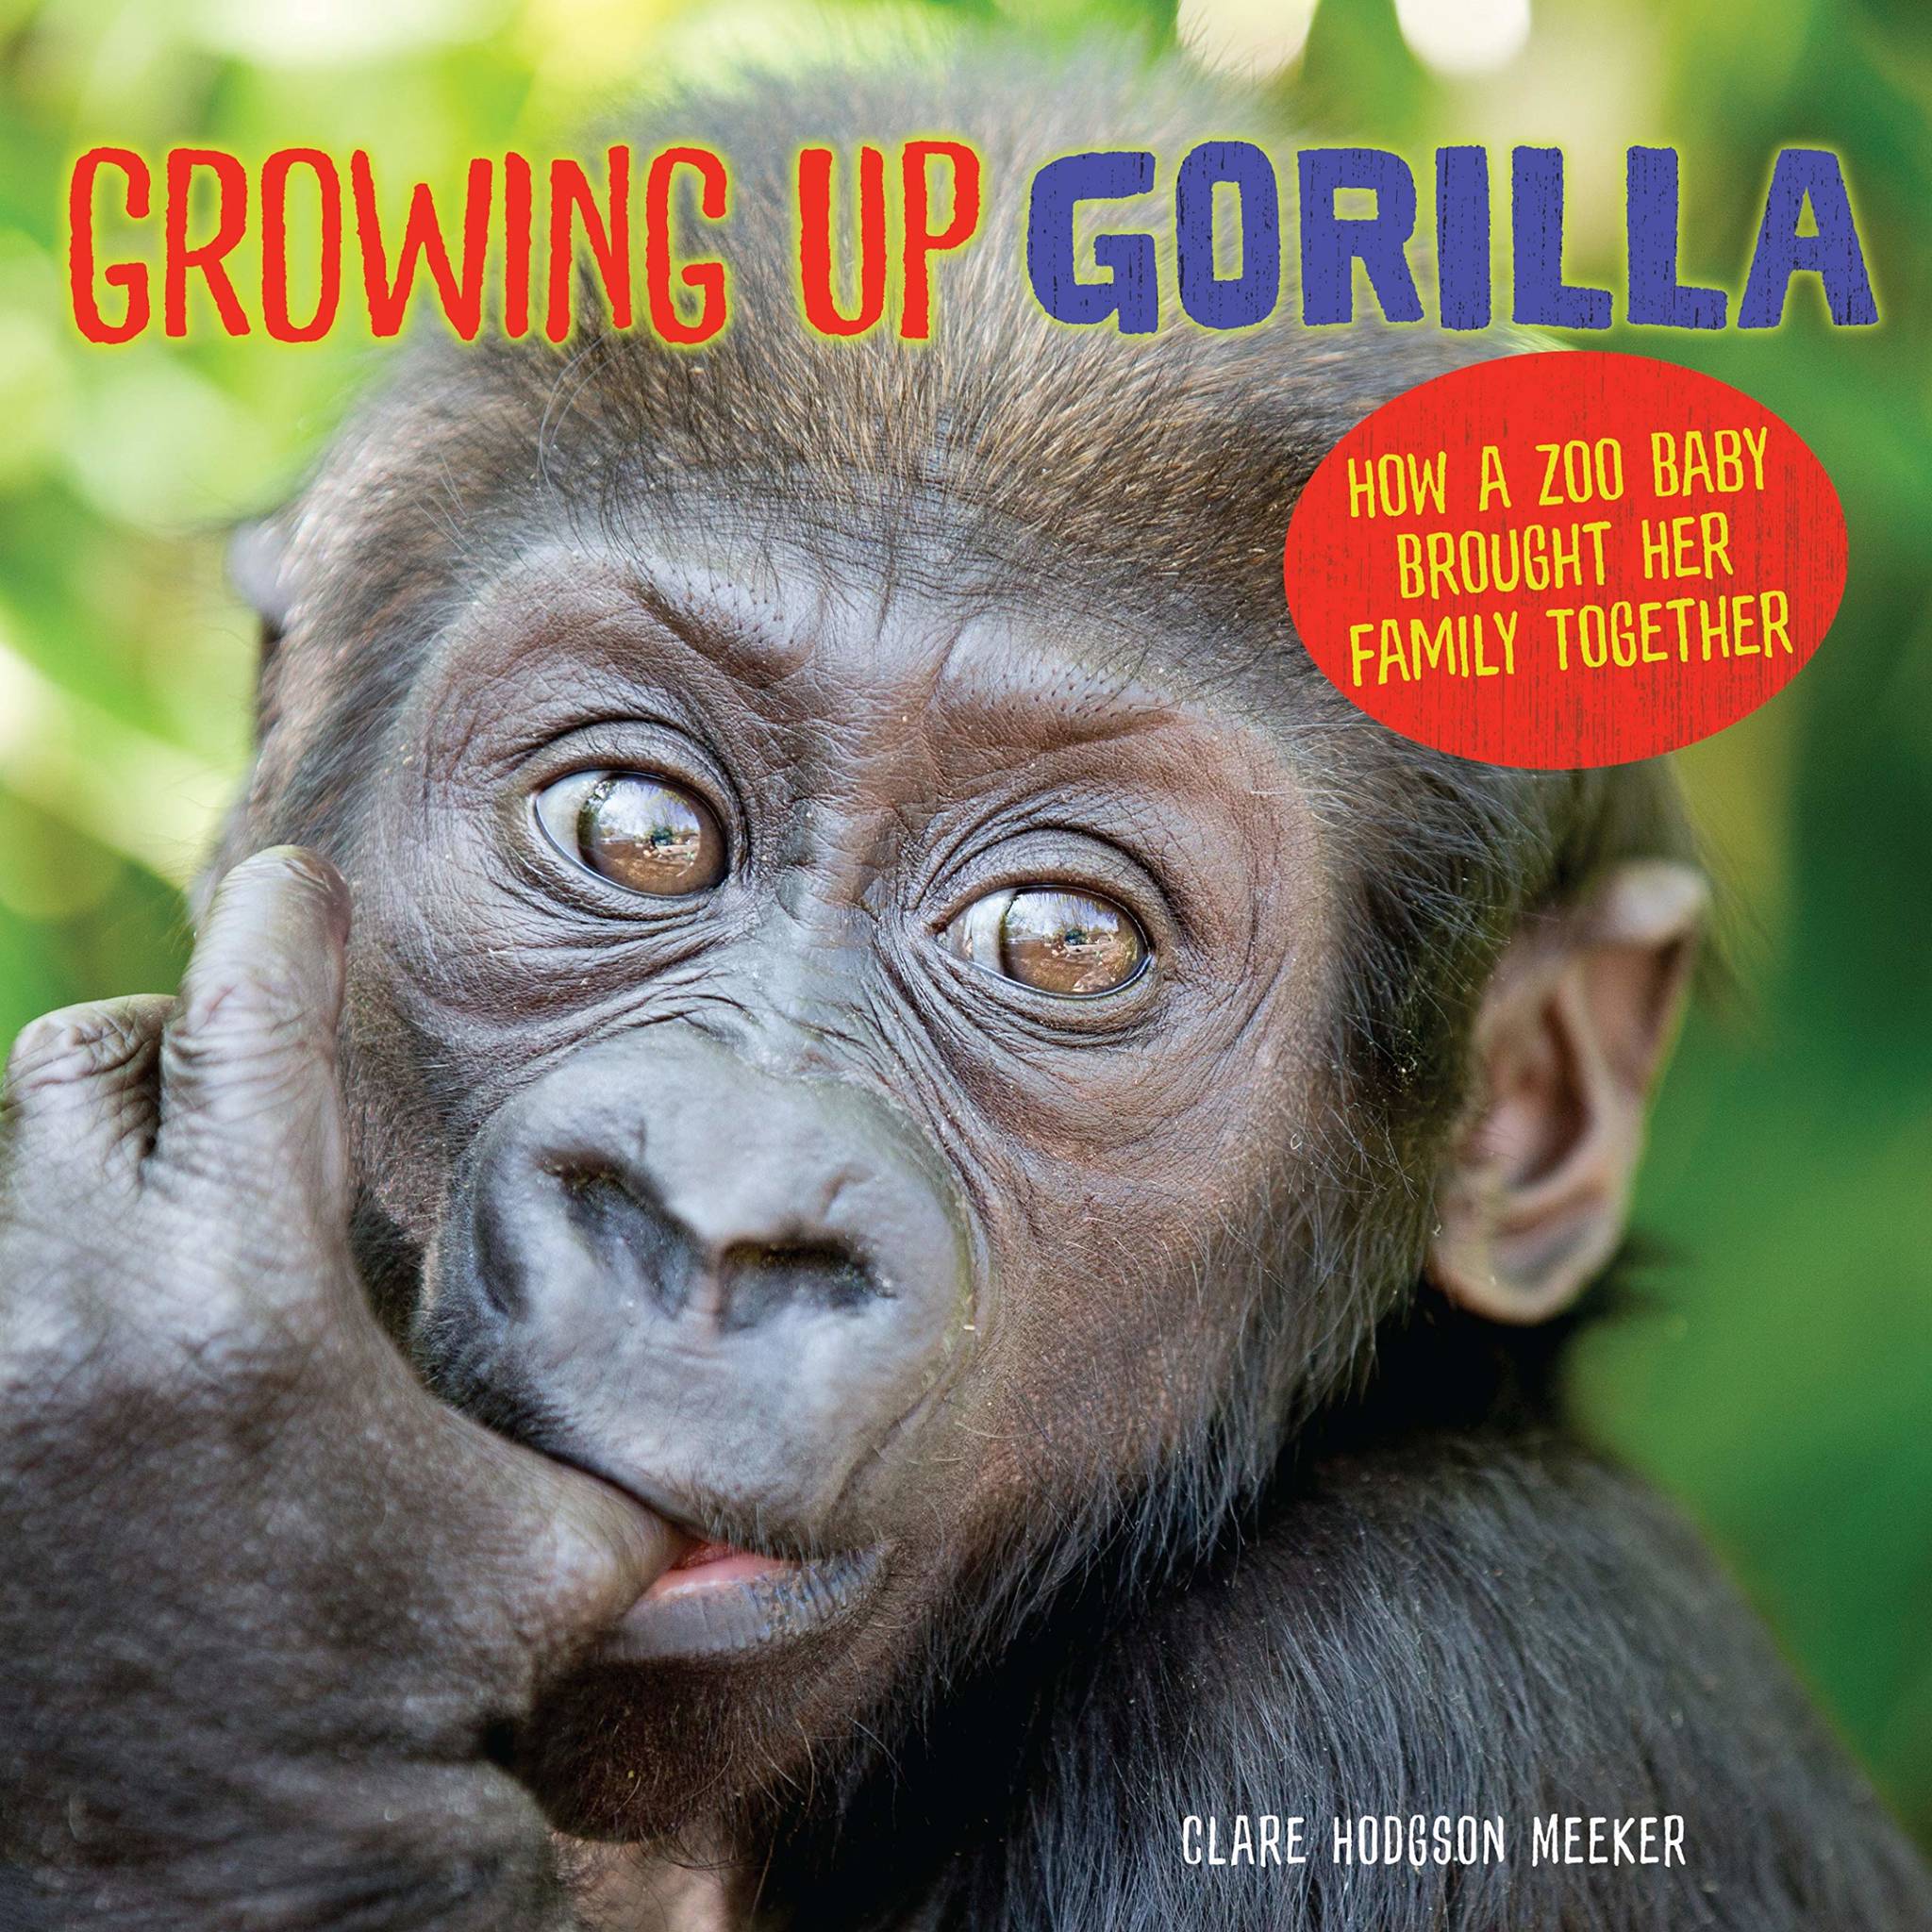 “Growing Up Gorilla” author presents at library